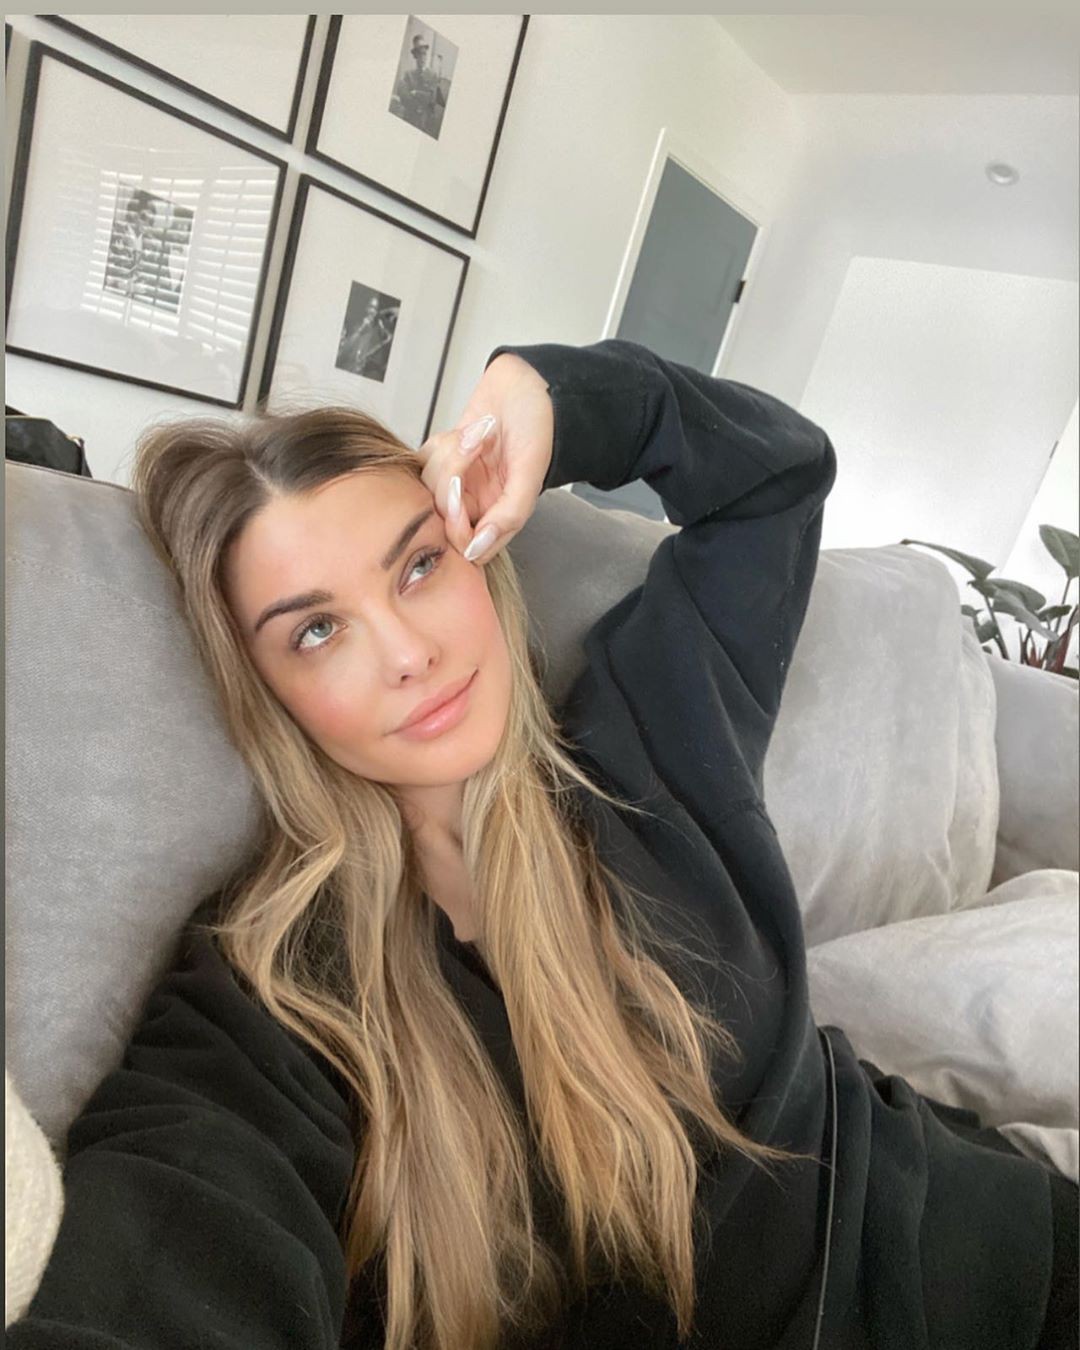 Emily Sears blond hairs pic, Glossy Lips, Long Hairstyle Girls